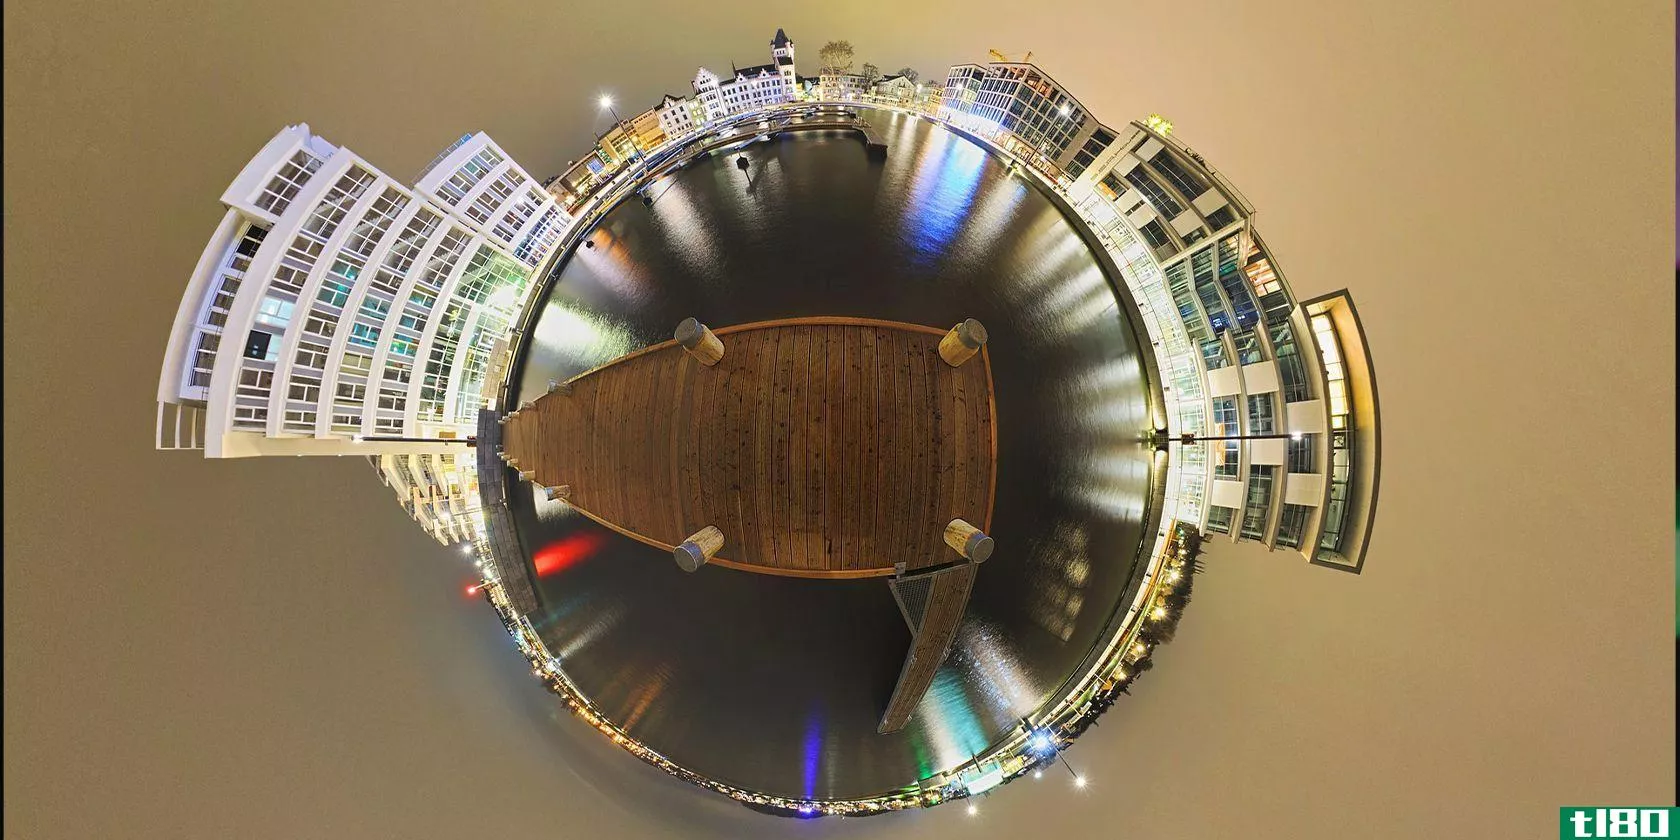 Take a 360 with your phone